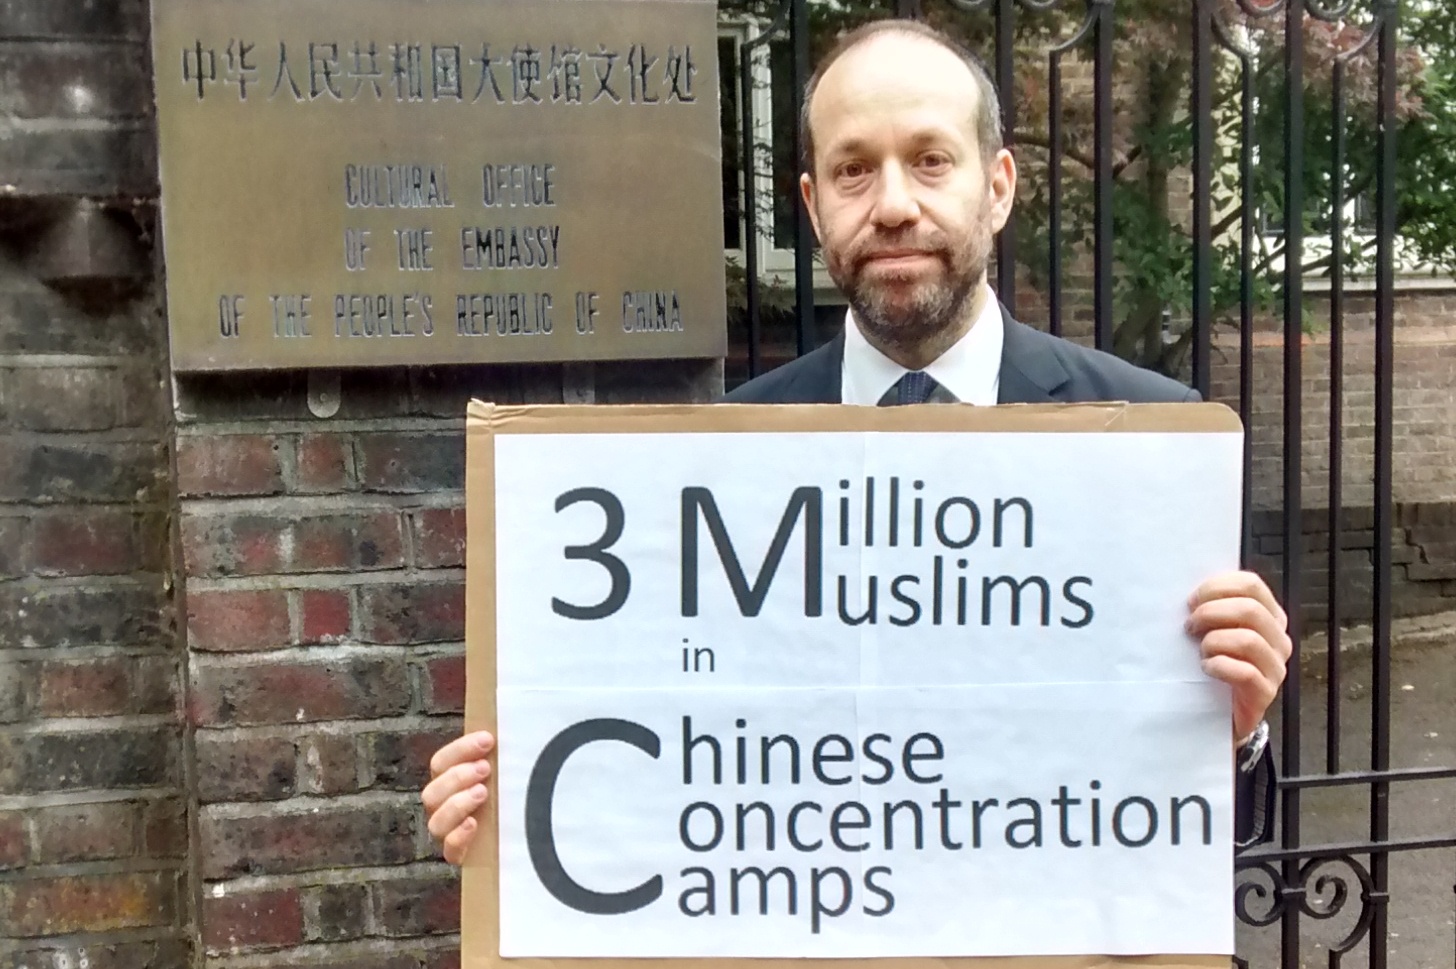 Here's why people are protesting outside the Chinese Embassy